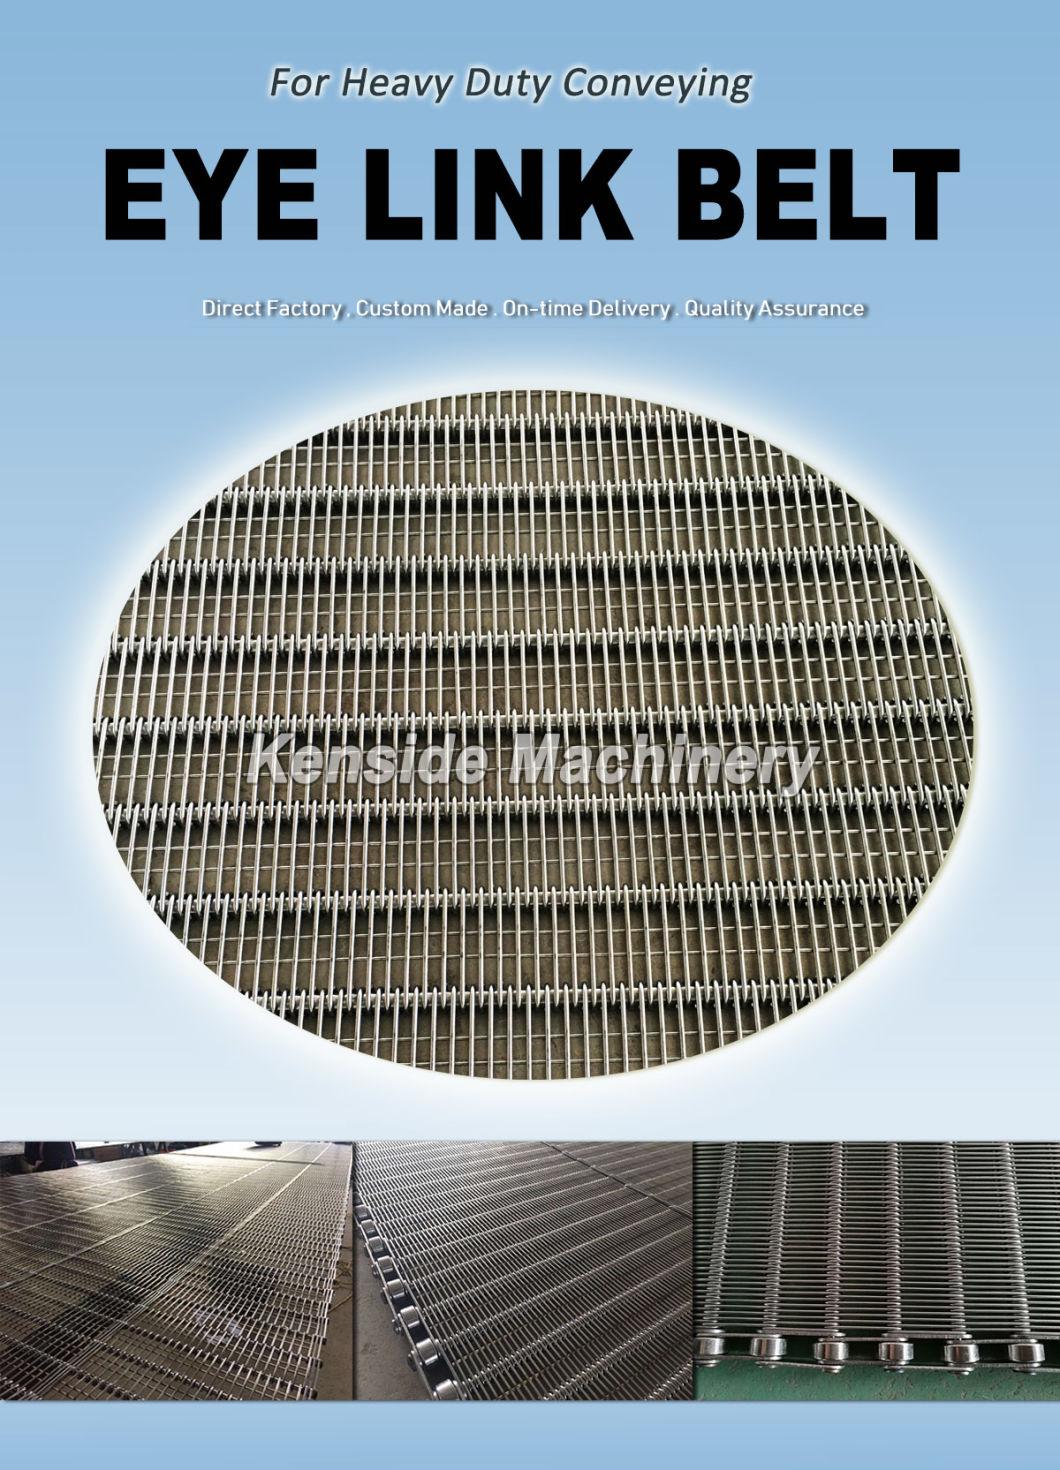 Stainless Steel Eye Link Belt for Grading Seafood